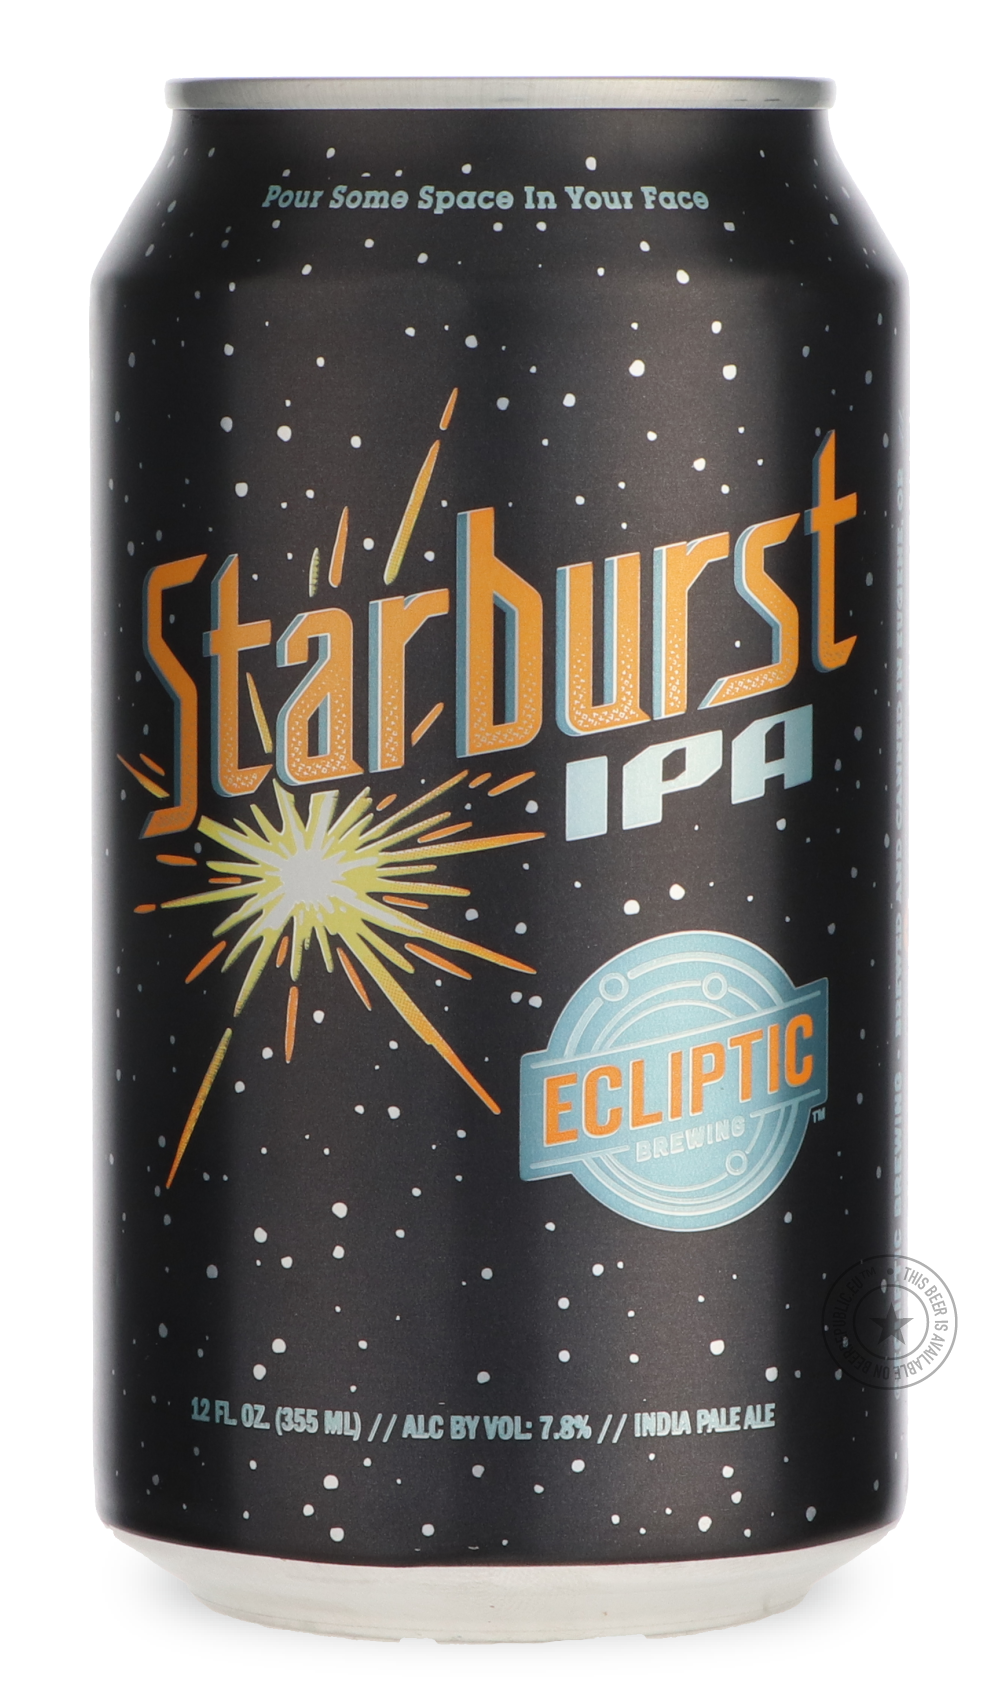 -Ecliptic- Starburst-IPA- Only @ Beer Republic - The best online beer store for American & Canadian craft beer - Buy beer online from the USA and Canada - Bier online kopen - Amerikaans bier kopen - Craft beer store - Craft beer kopen - Amerikanisch bier kaufen - Bier online kaufen - Acheter biere online - IPA - Stout - Porter - New England IPA - Hazy IPA - Imperial Stout - Barrel Aged - Barrel Aged Imperial Stout - Brown - Dark beer - Blond - Blonde - Pilsner - Lager - Wheat - Weizen - Amber - Barley Wine 